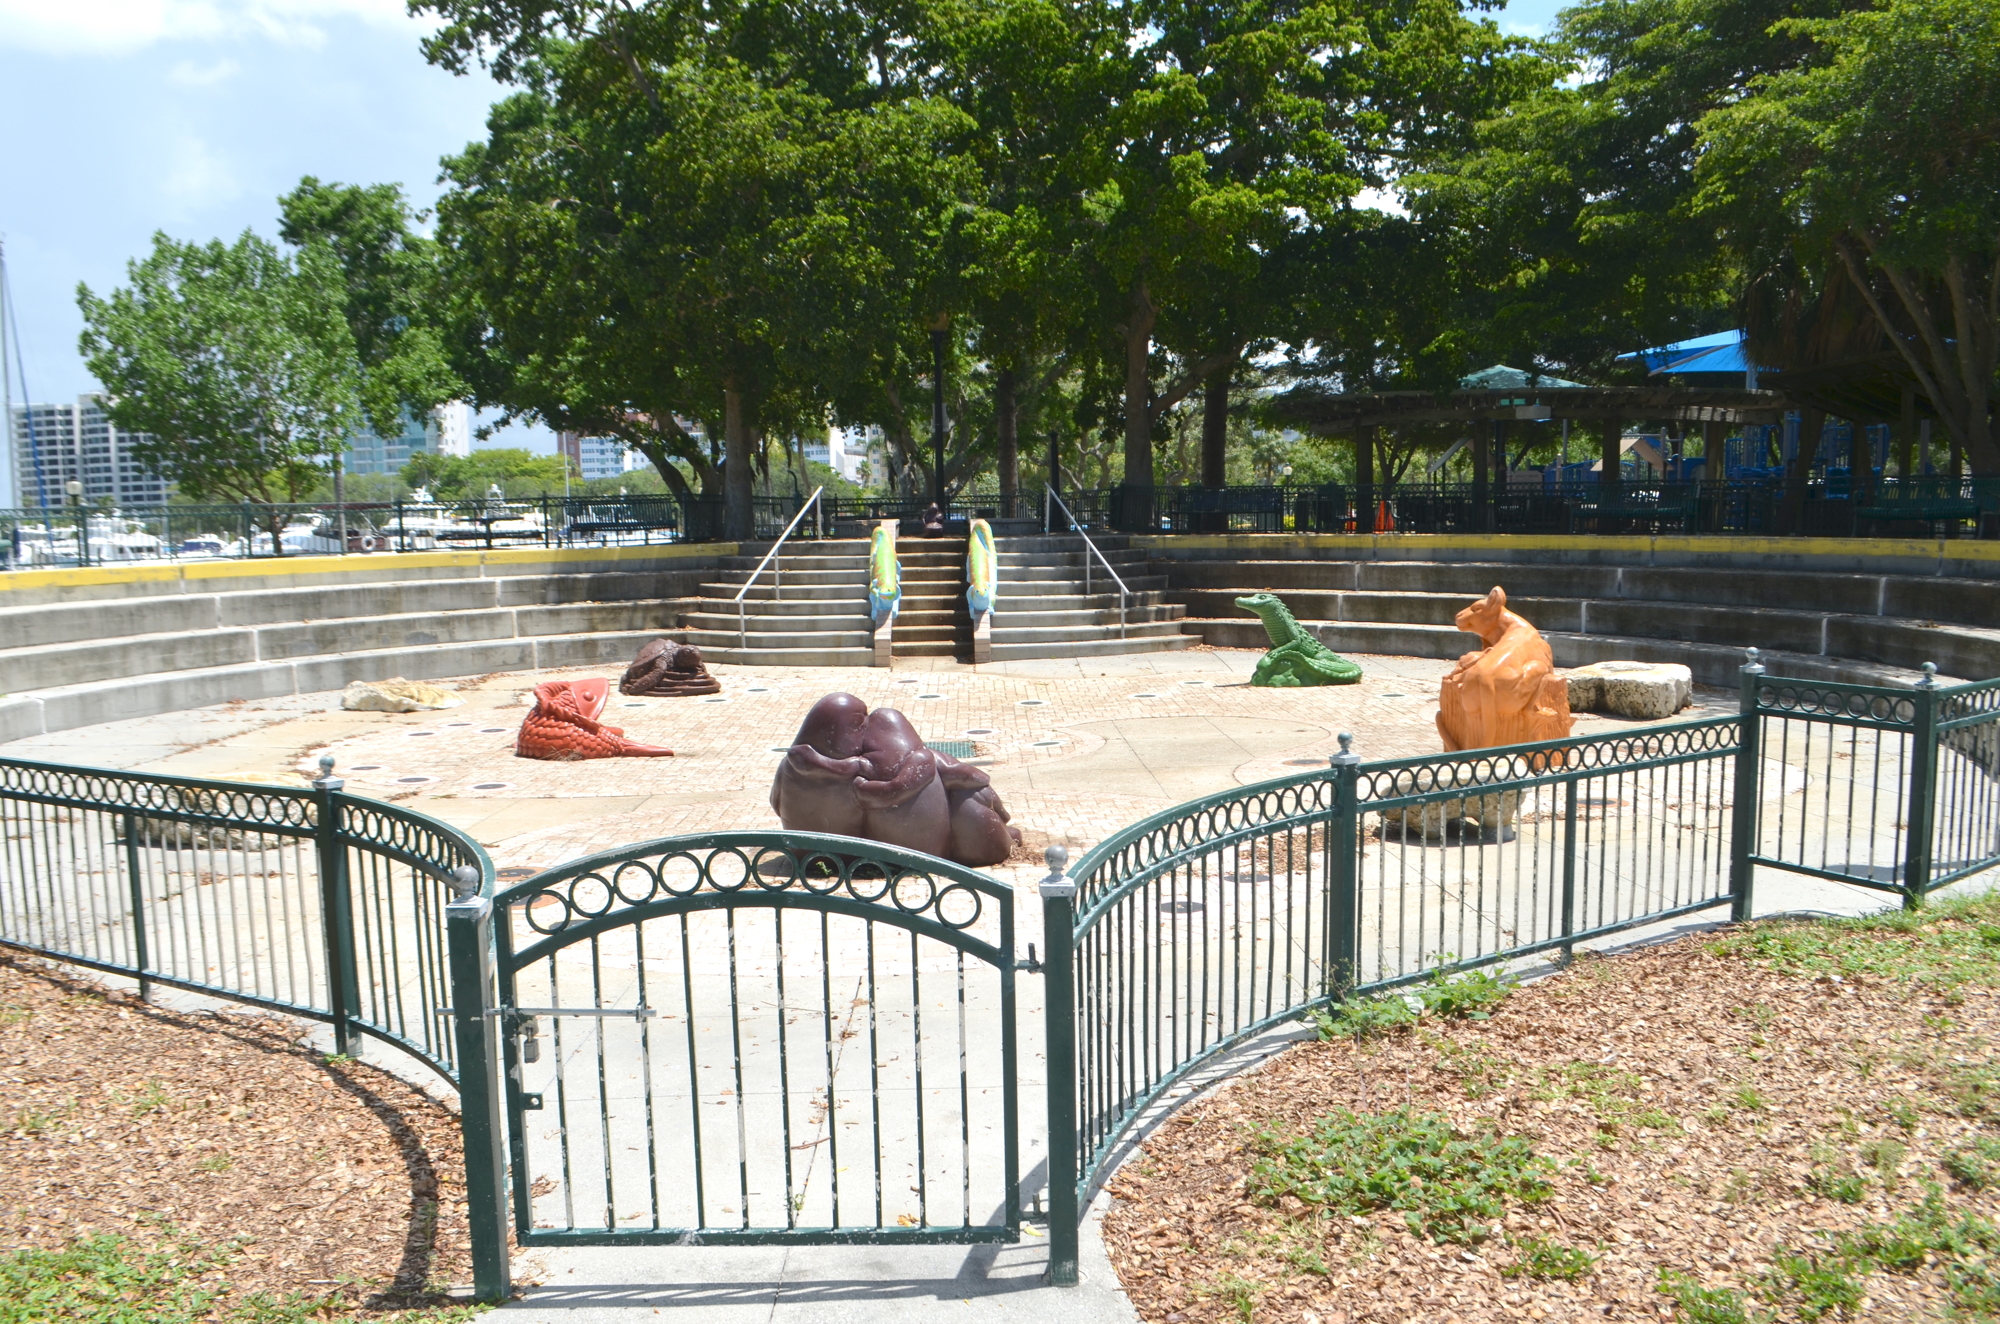 A fabric shade structure, which had been removed from the Bayfront Park splash pad replacement as a cost savings measure, has been added to the project at a cost of nearly $300,000. (File photo)